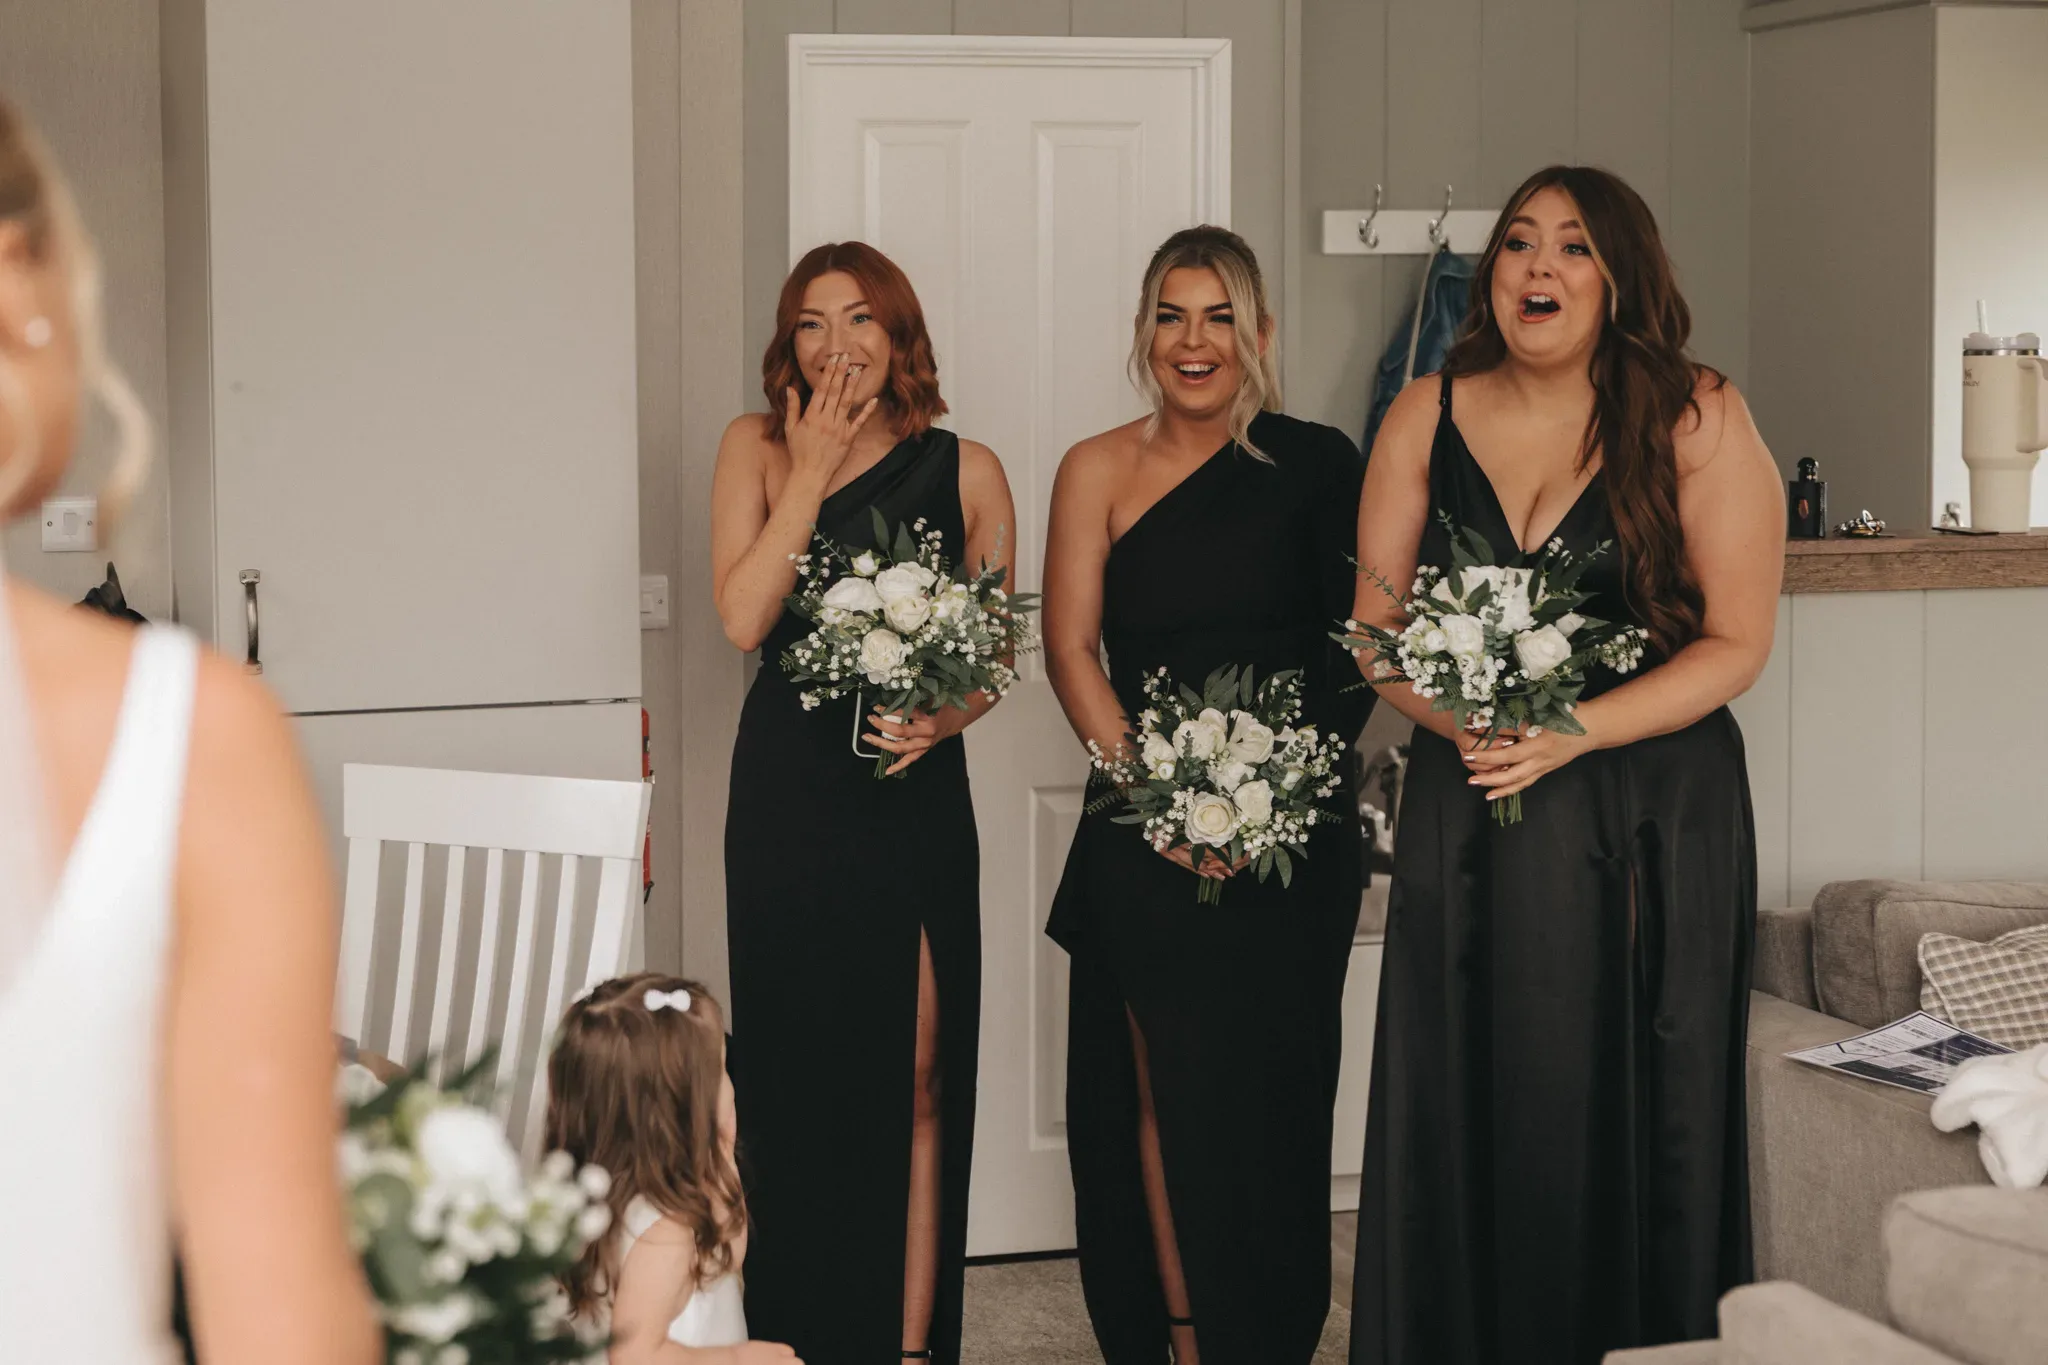 Three women in elegant black dresses hold white bouquets and express joy and surprise, watching a bride in the foreground in a home setting.